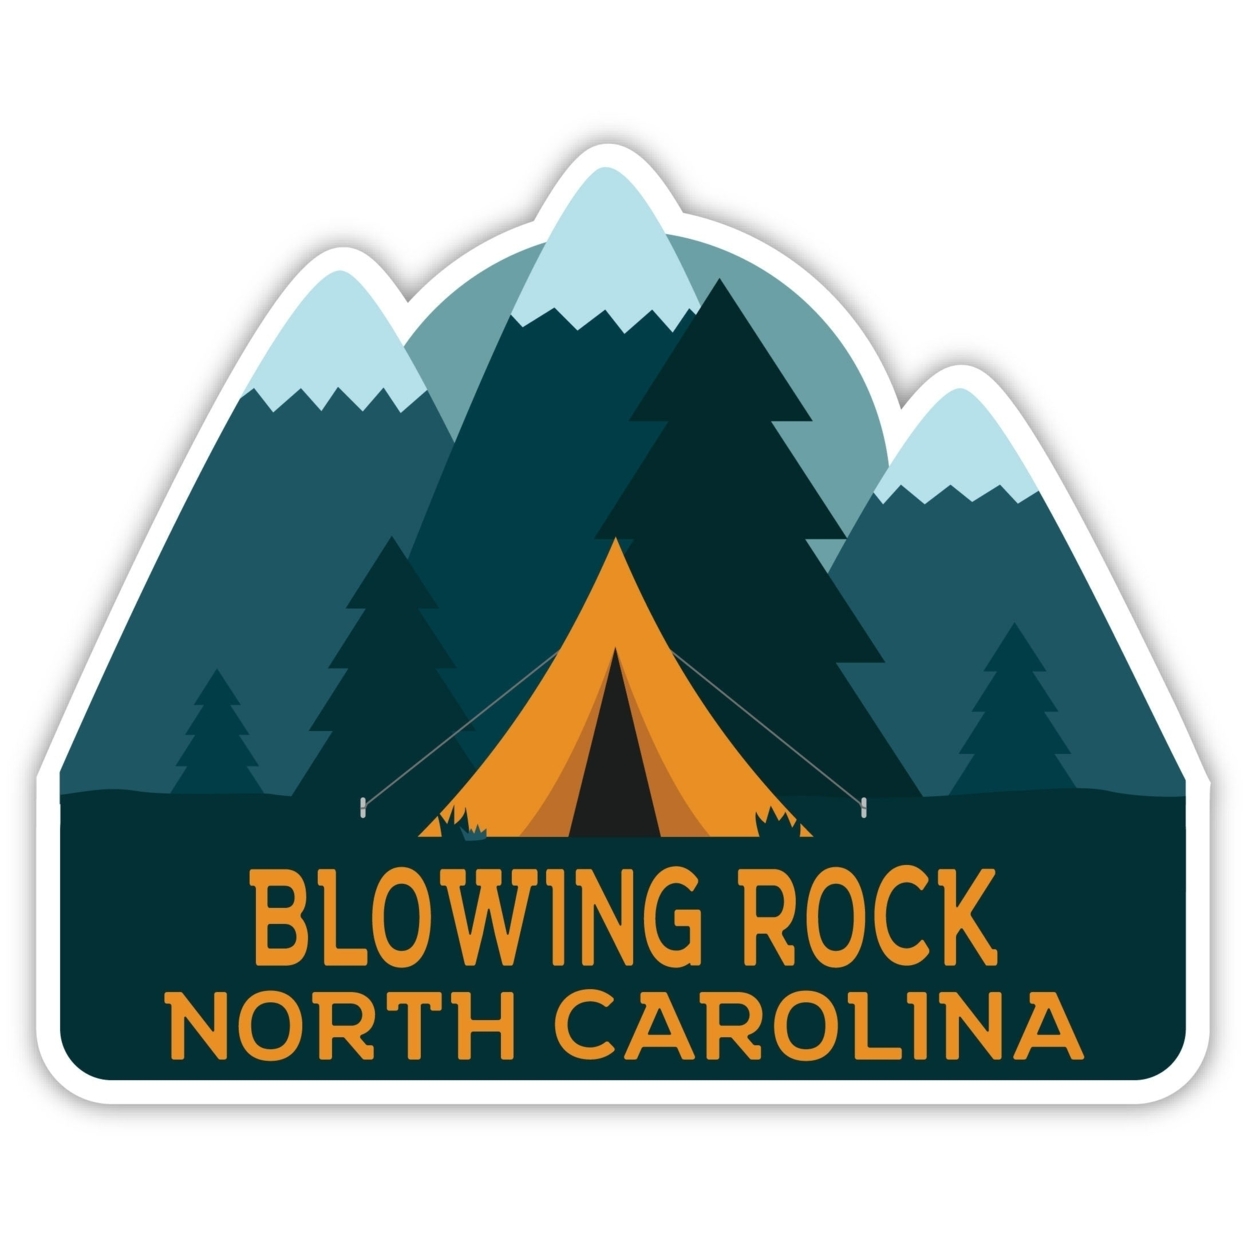 Blowing Rock North Carolina Souvenir Decorative Stickers (Choose Theme And Size) - 4-Pack, 12-Inch, Tent